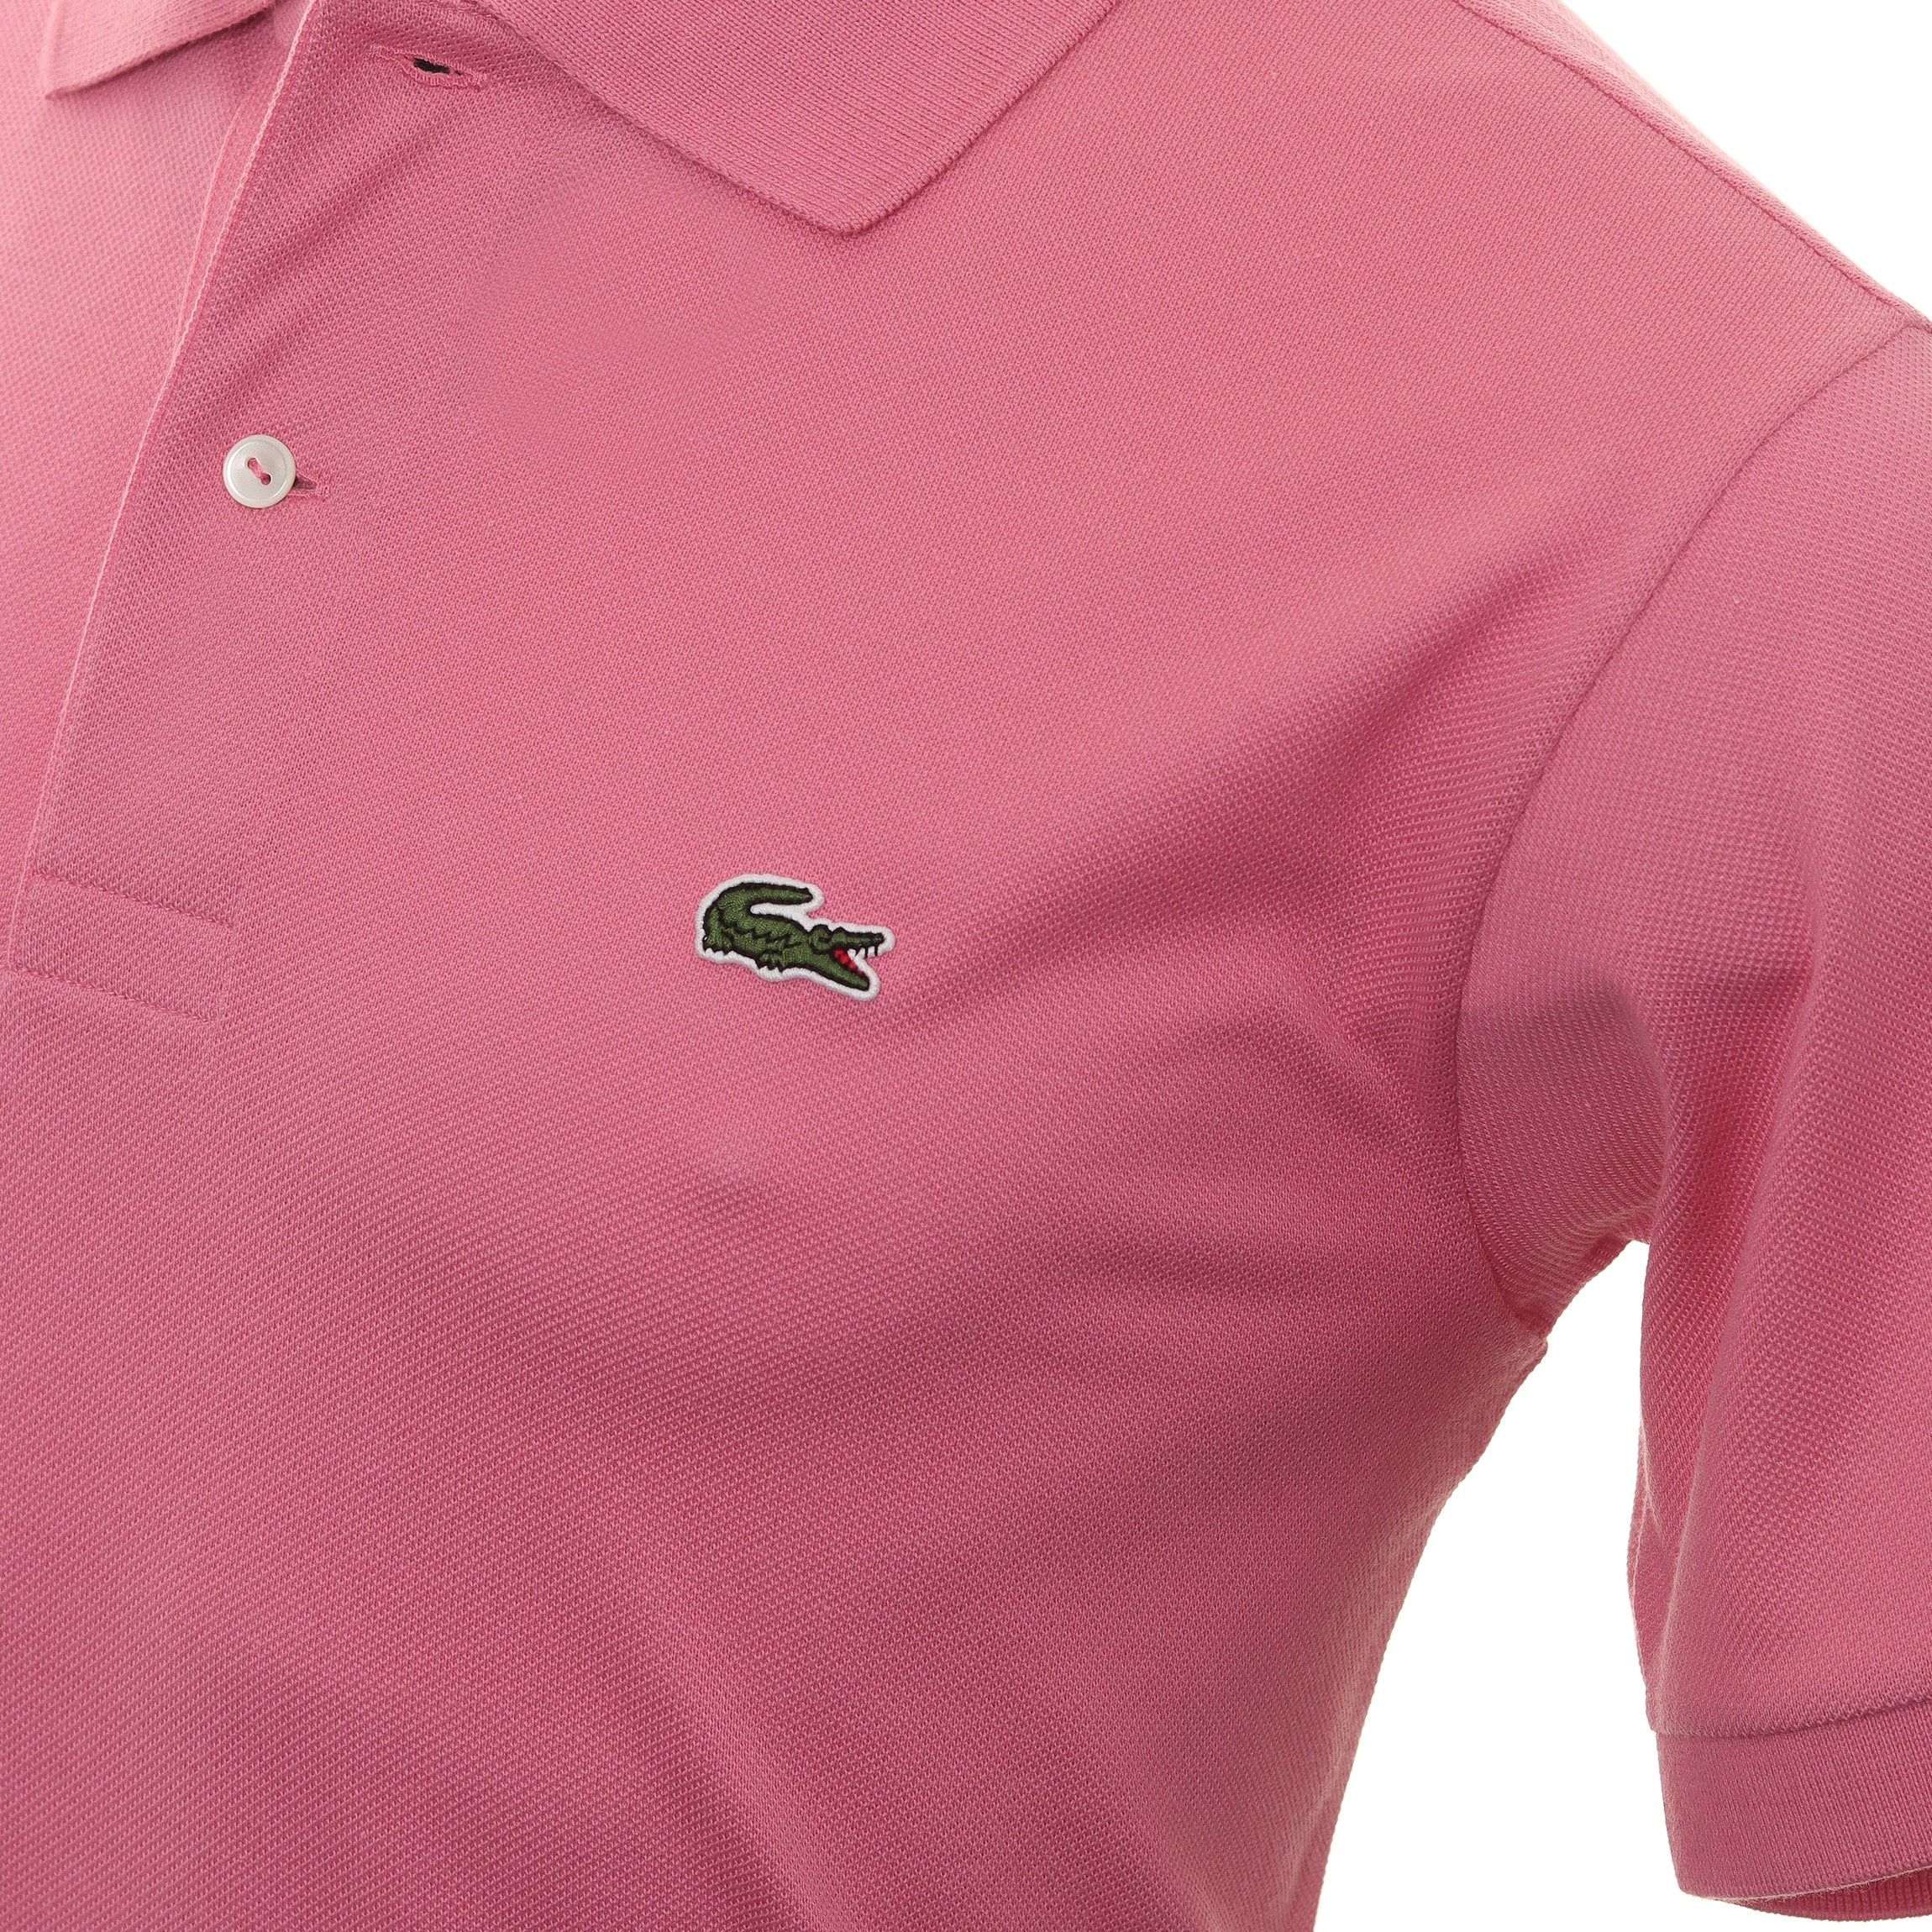 Lacoste Classic Pique Polo Shirt | 2R3 | L1212 Reseda Restrictedgs Function18 Pink